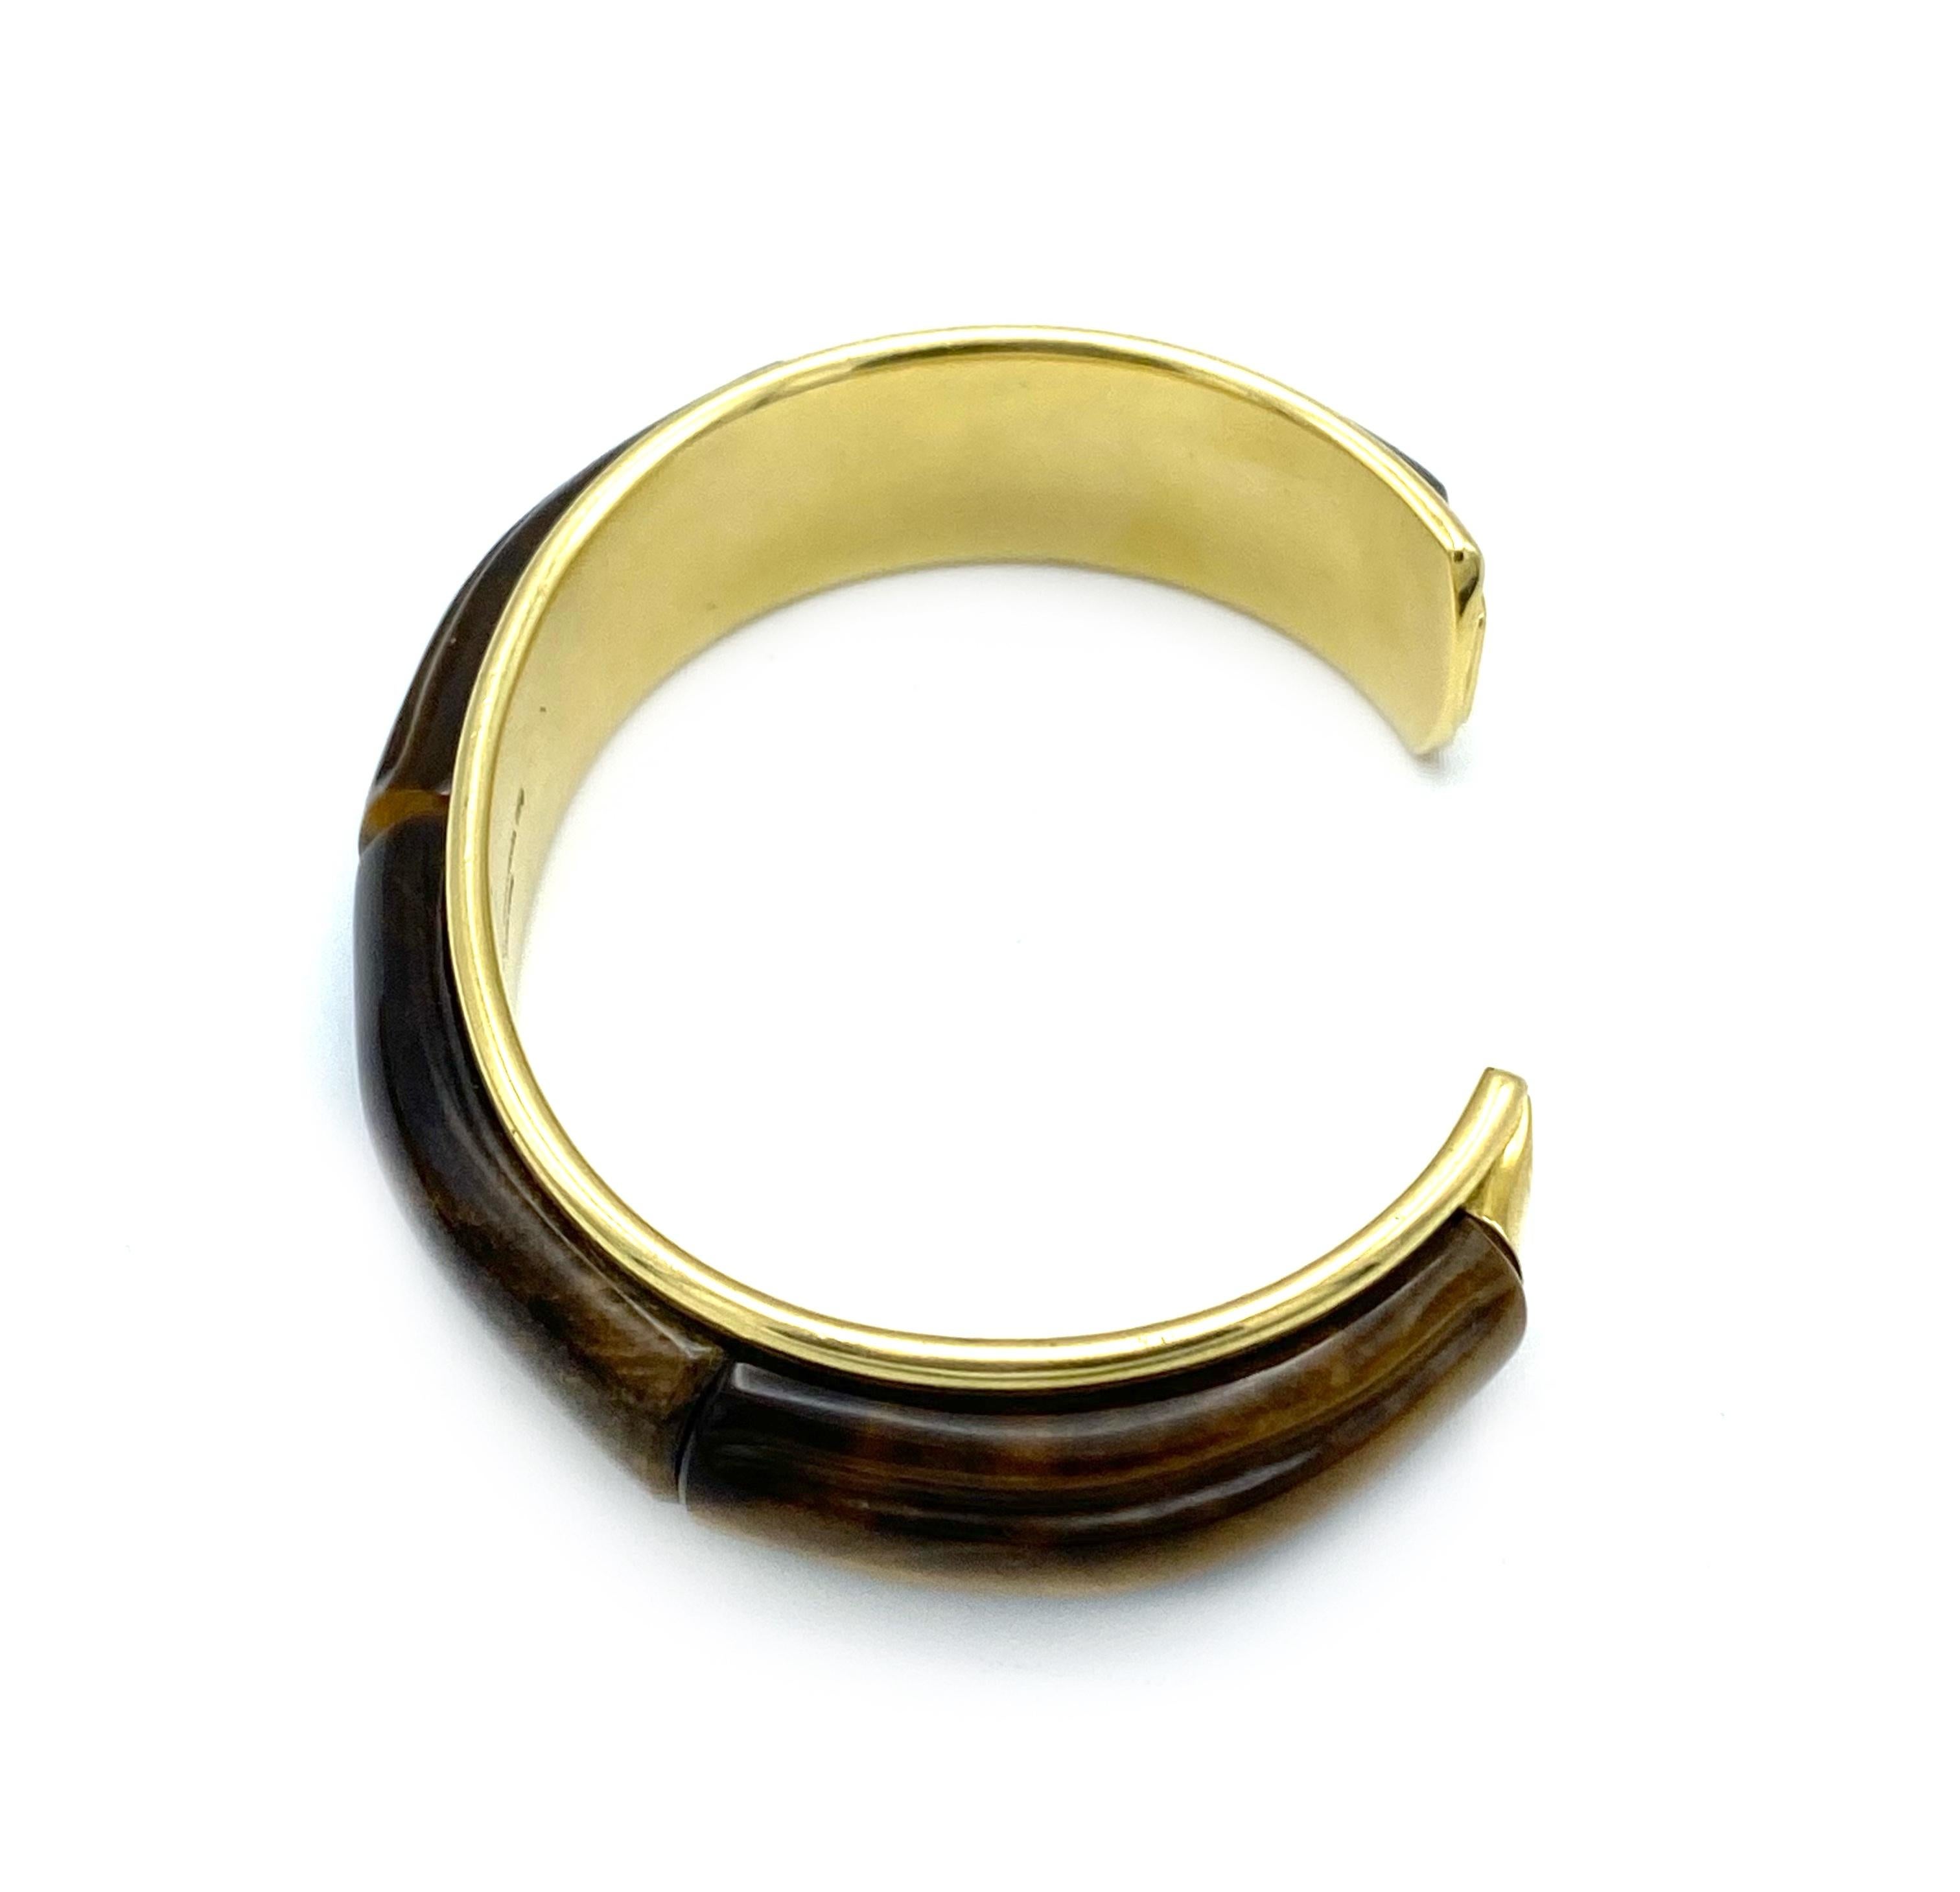 Product details:

The bangle is designed by Tiffany and Co. in 2002 in Hong Kong. It is made out of 18 karat yellow gold and detailed with tiger's eye accent. The bangle bits up to size 6.

Hallmarks: 2002 Tiffany & Co. 750 Hong Kong
Total weight is